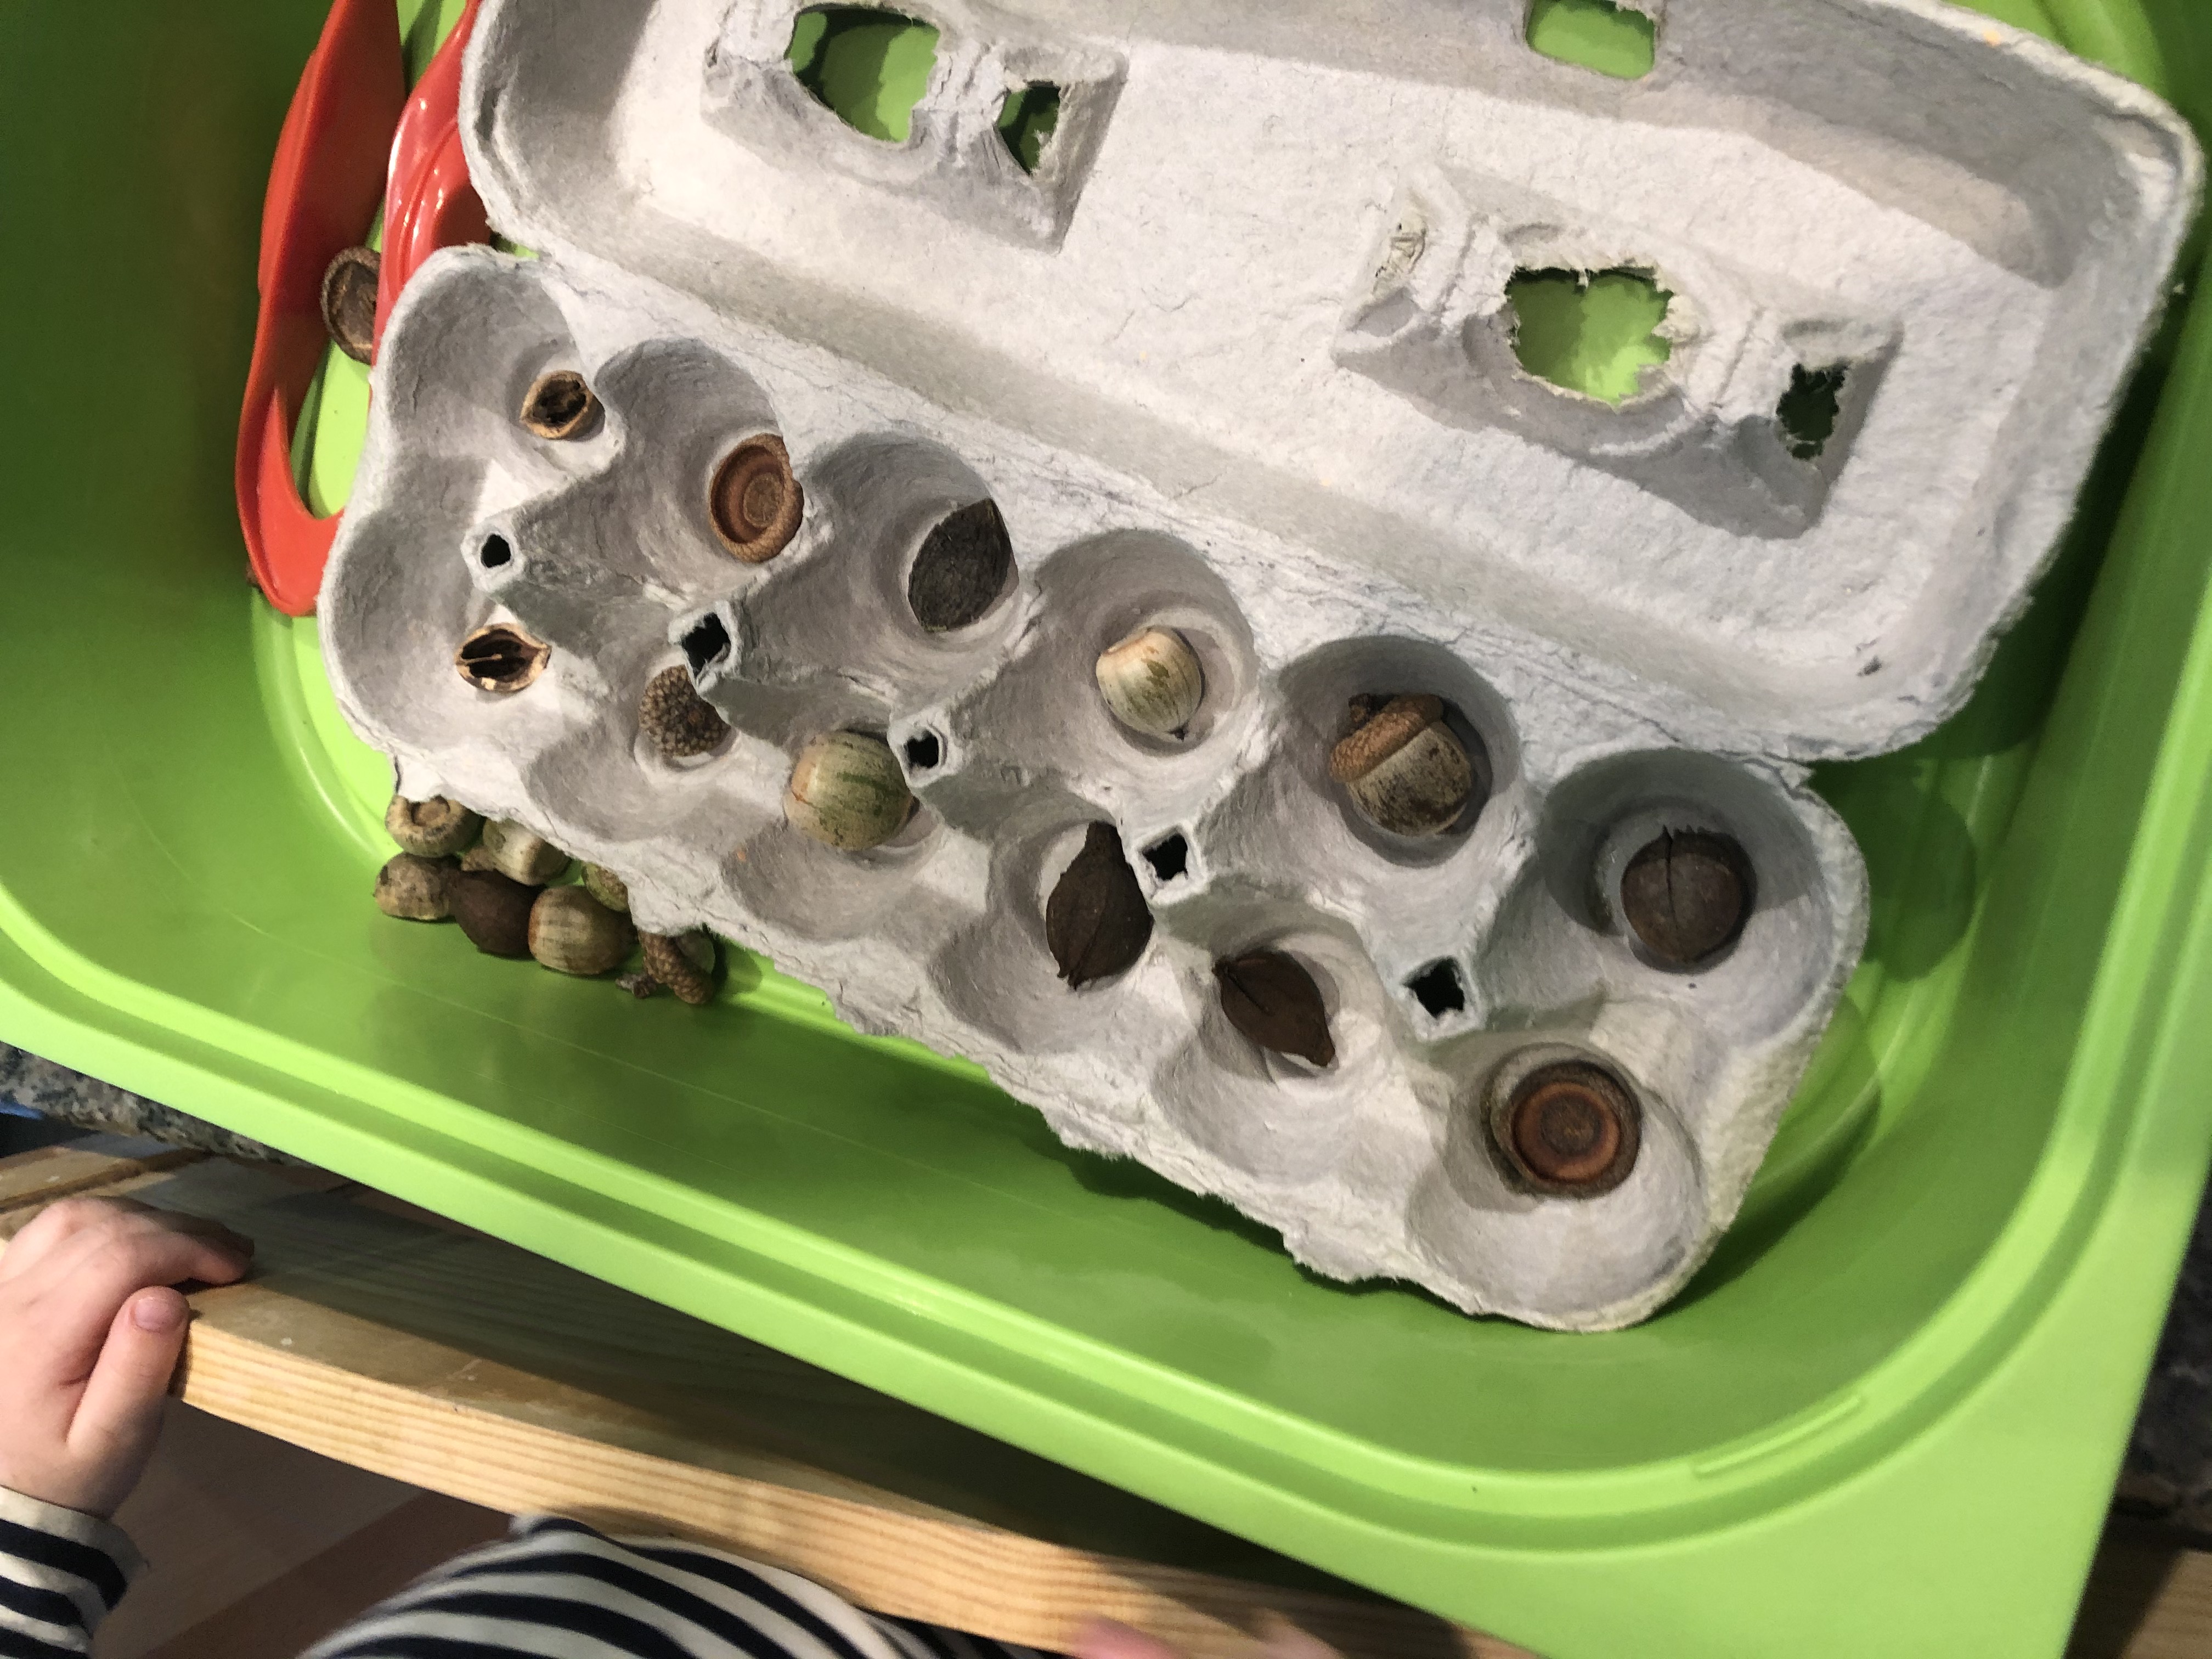 loose parts play: child placing acorns in egg carton with tweezers.